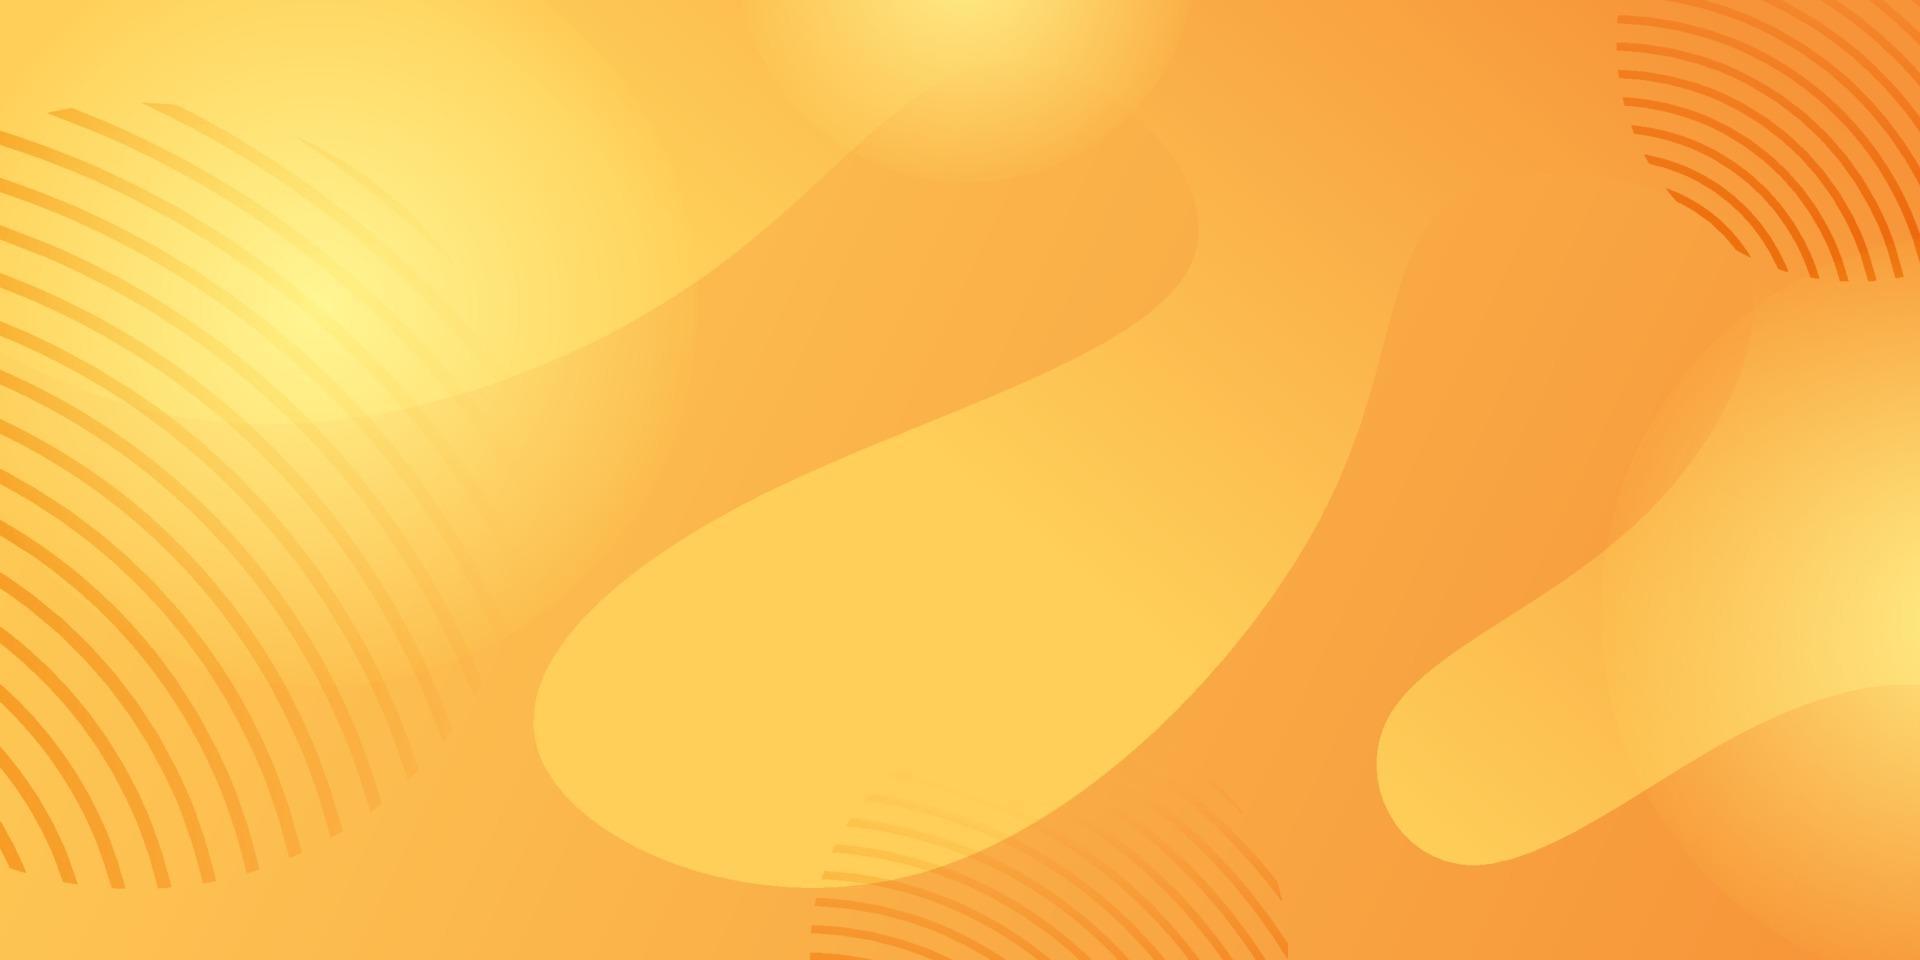 Trendy gradient geometric shape background with dynamic element in orange color vector